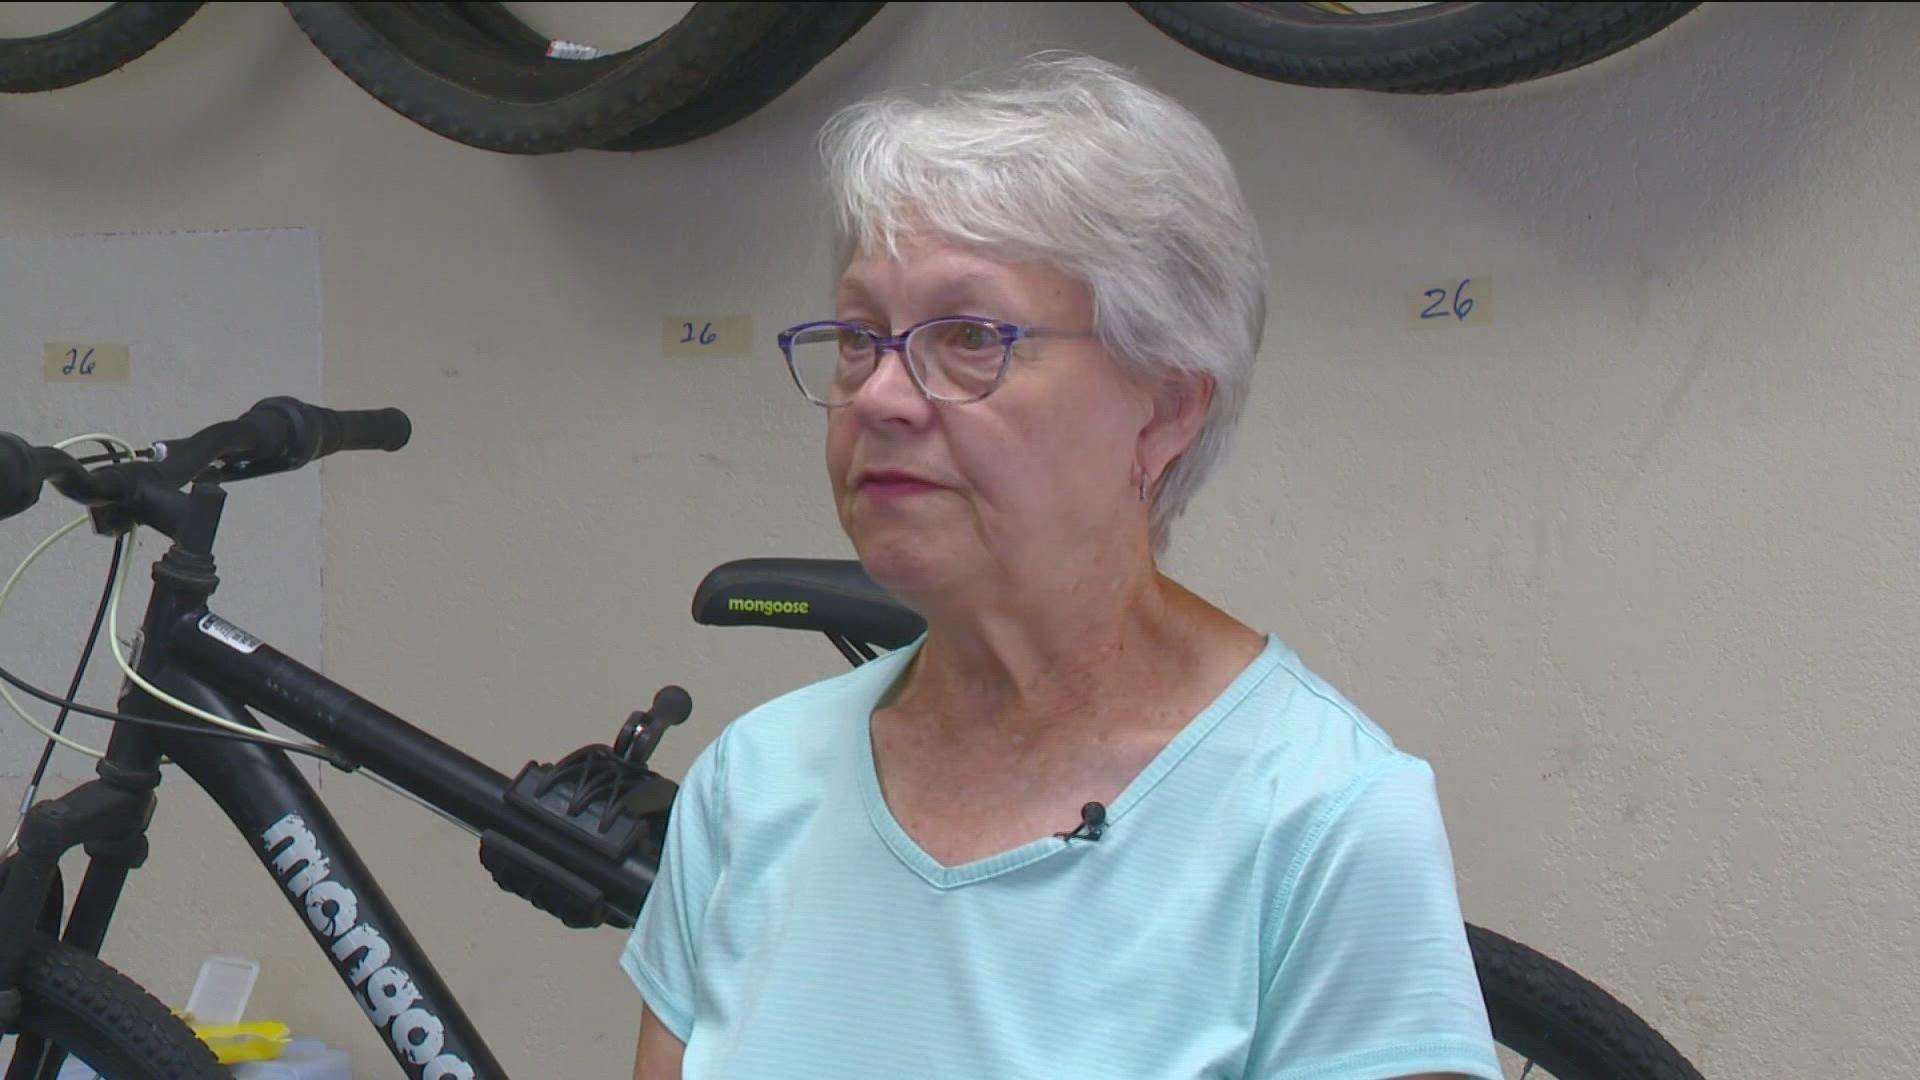 With director and founder LaRita Schandorff stepping down, the Nampa Bicycle Project is in need of a new leader and location by the end of 2022.